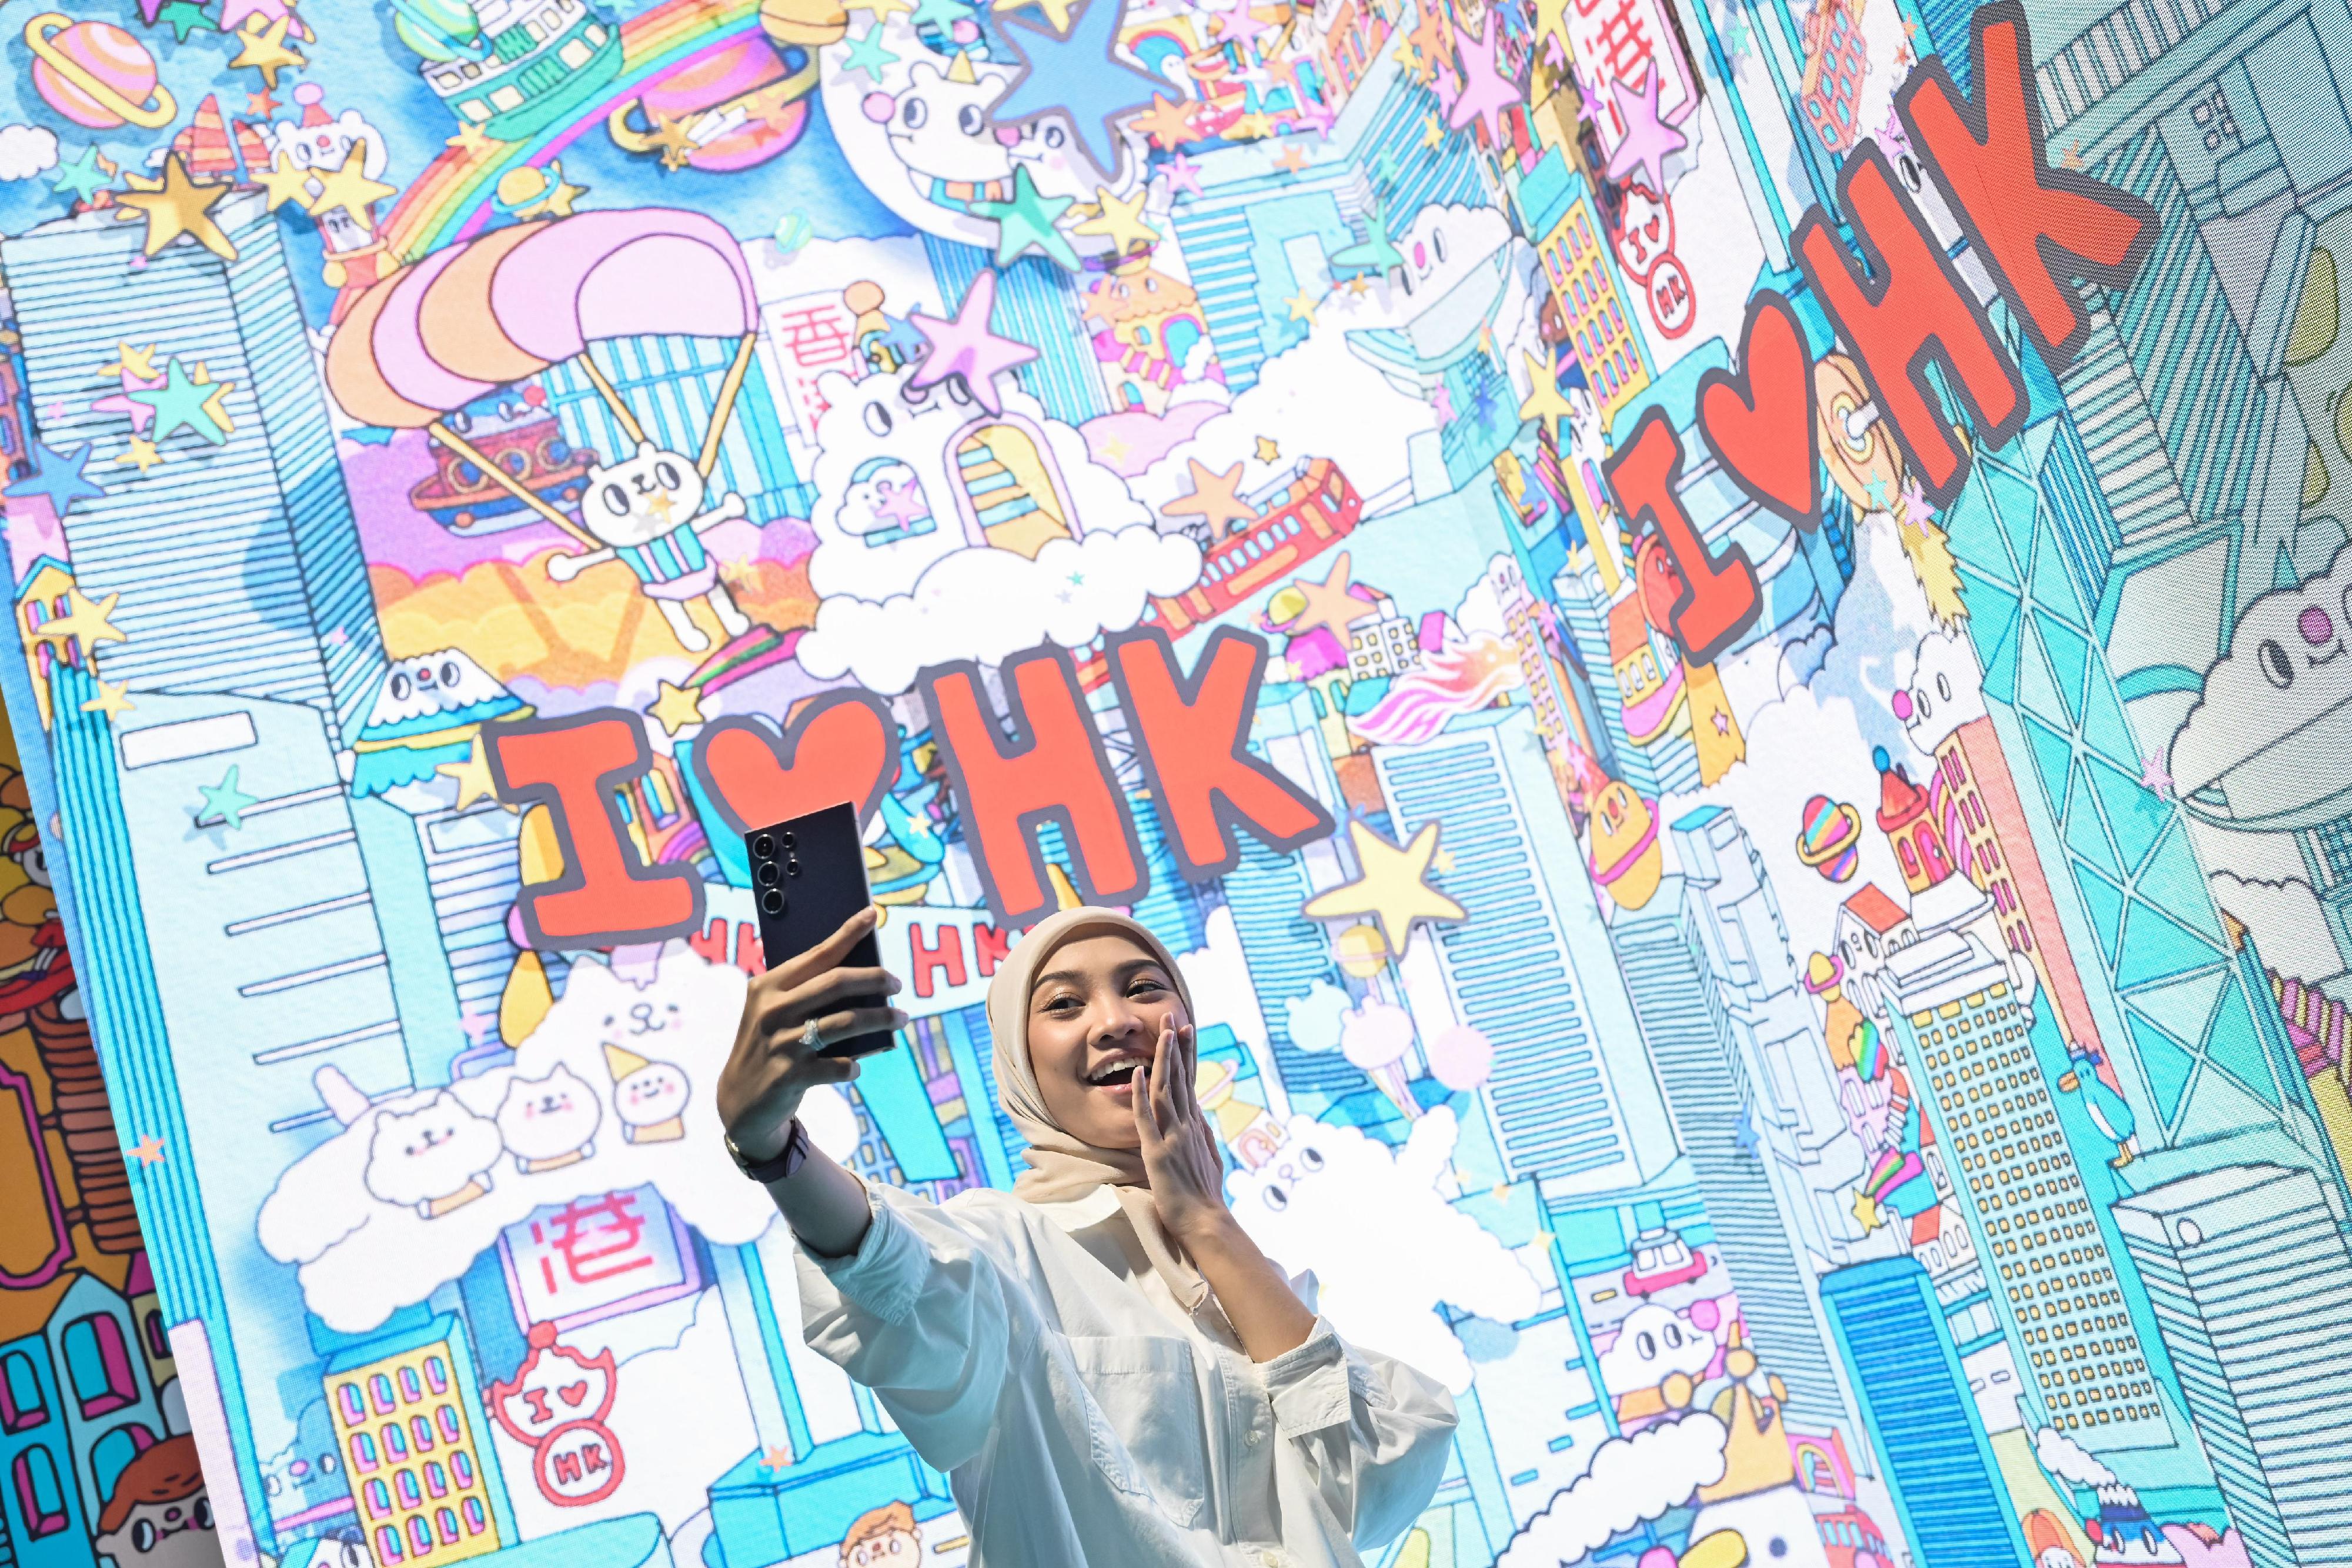 The "Immersive Hong Kong" roving exhibition, which showcases Hong Kong's unique strengths, advantages and opportunities with art technology, was launched in Kuala Lumpur, Malaysia, today (March 3) as part of a promotional campaign in Association of Southeast Asian Nations countries. Photo shows a photo corner featuring the illustration works of Hong Kong artist Messy Desk (Jane Lee) at the exhibition.